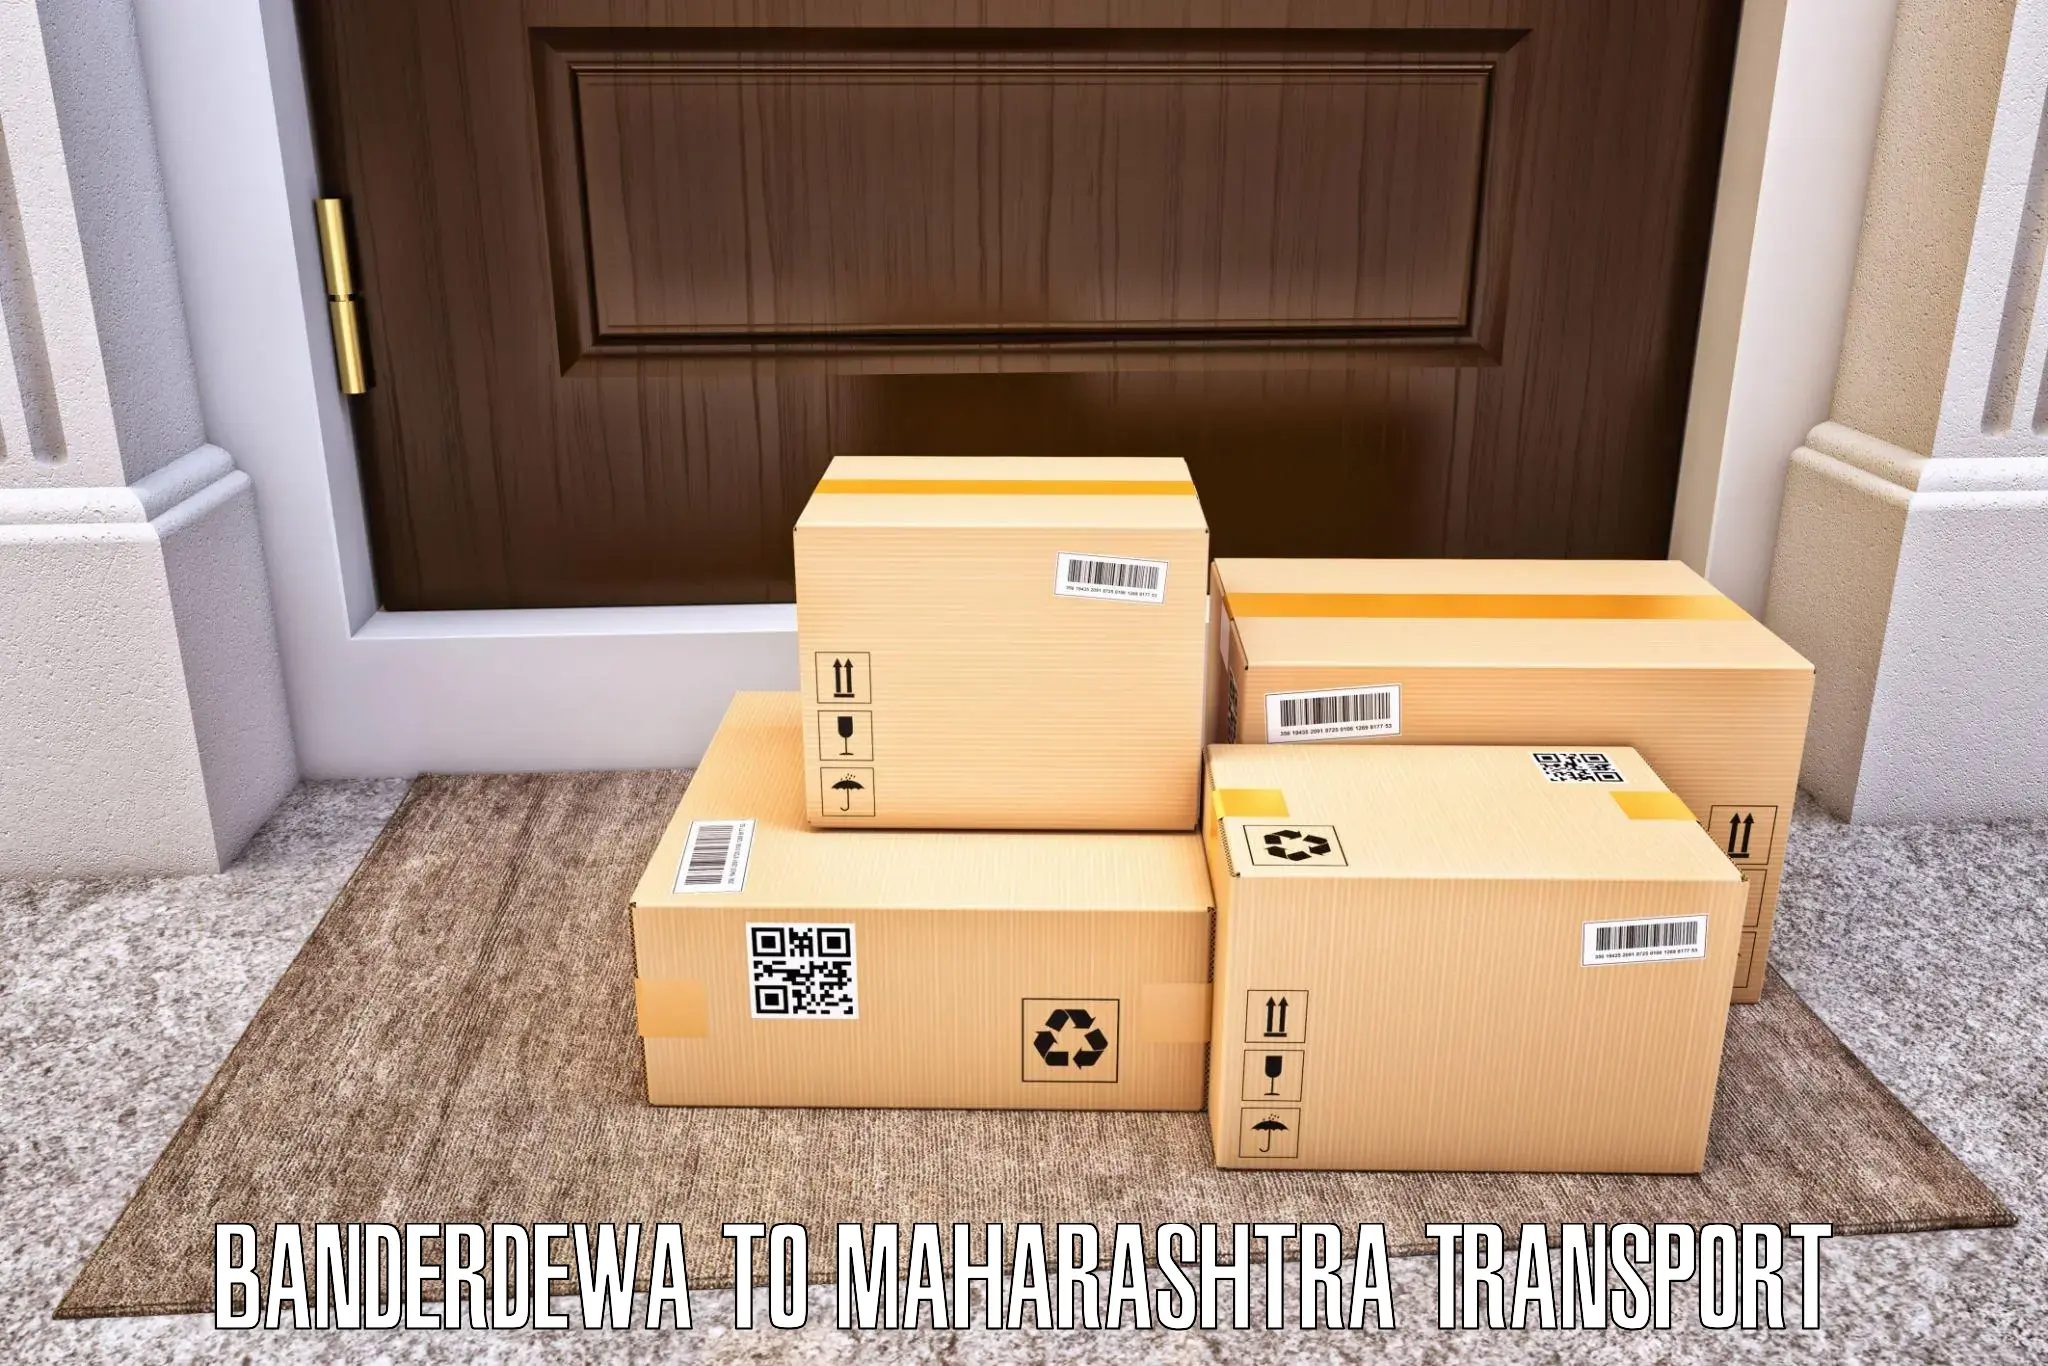 Goods delivery service Banderdewa to Dhule